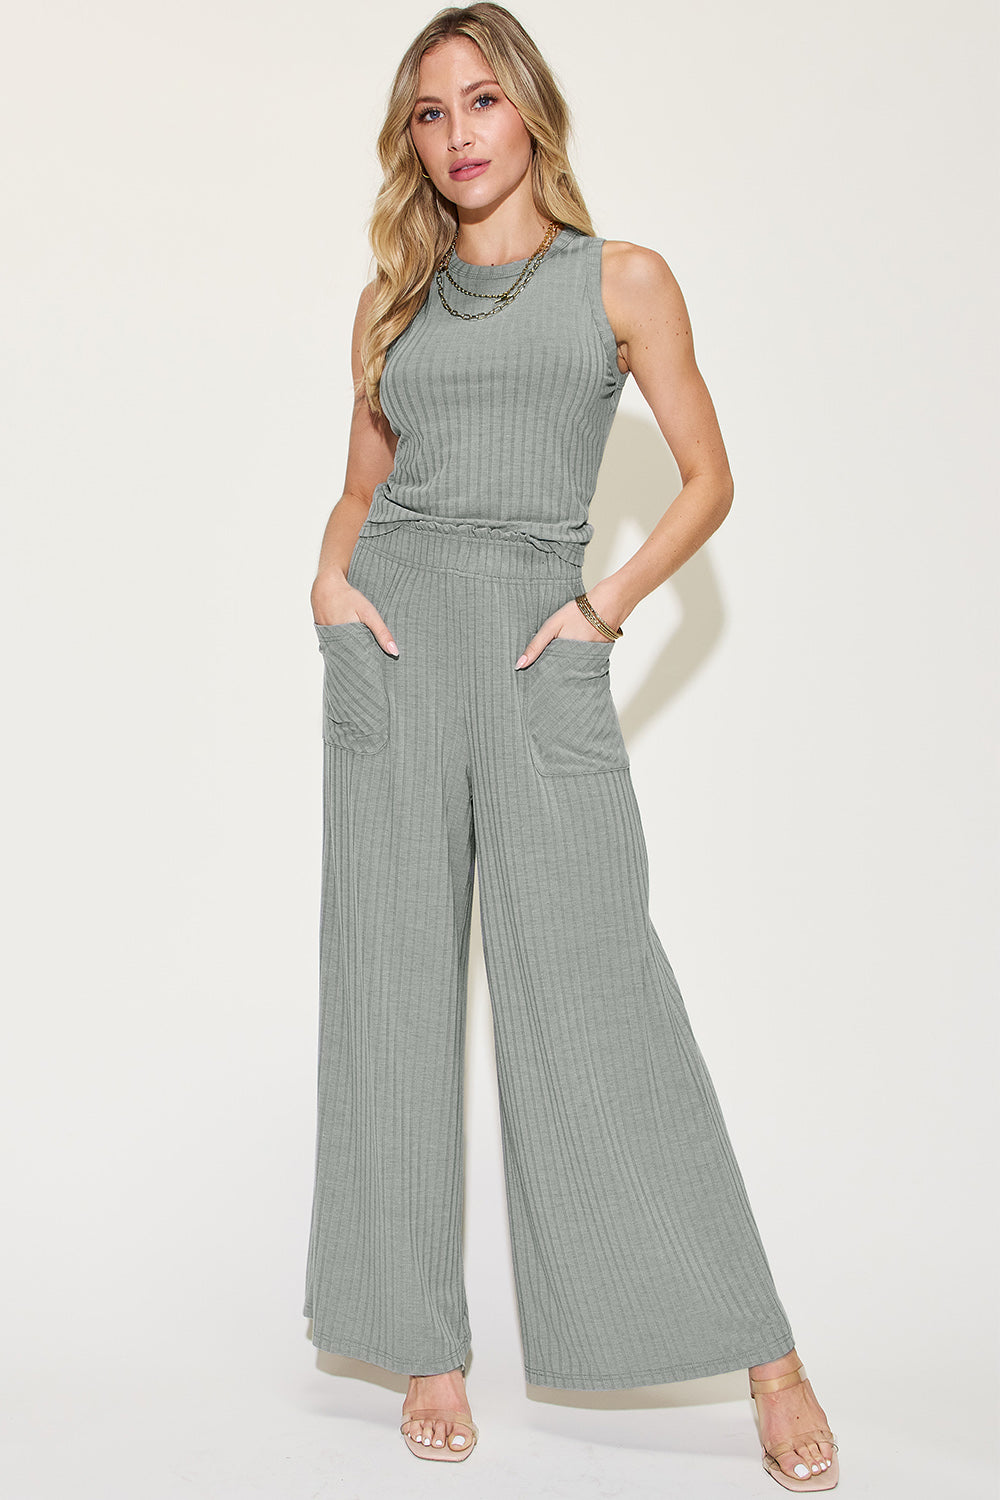 Basic Bae Full Size Ribbed Tank and Wide Leg Pants Set - Clothing Ensemble for All-Day Comfort